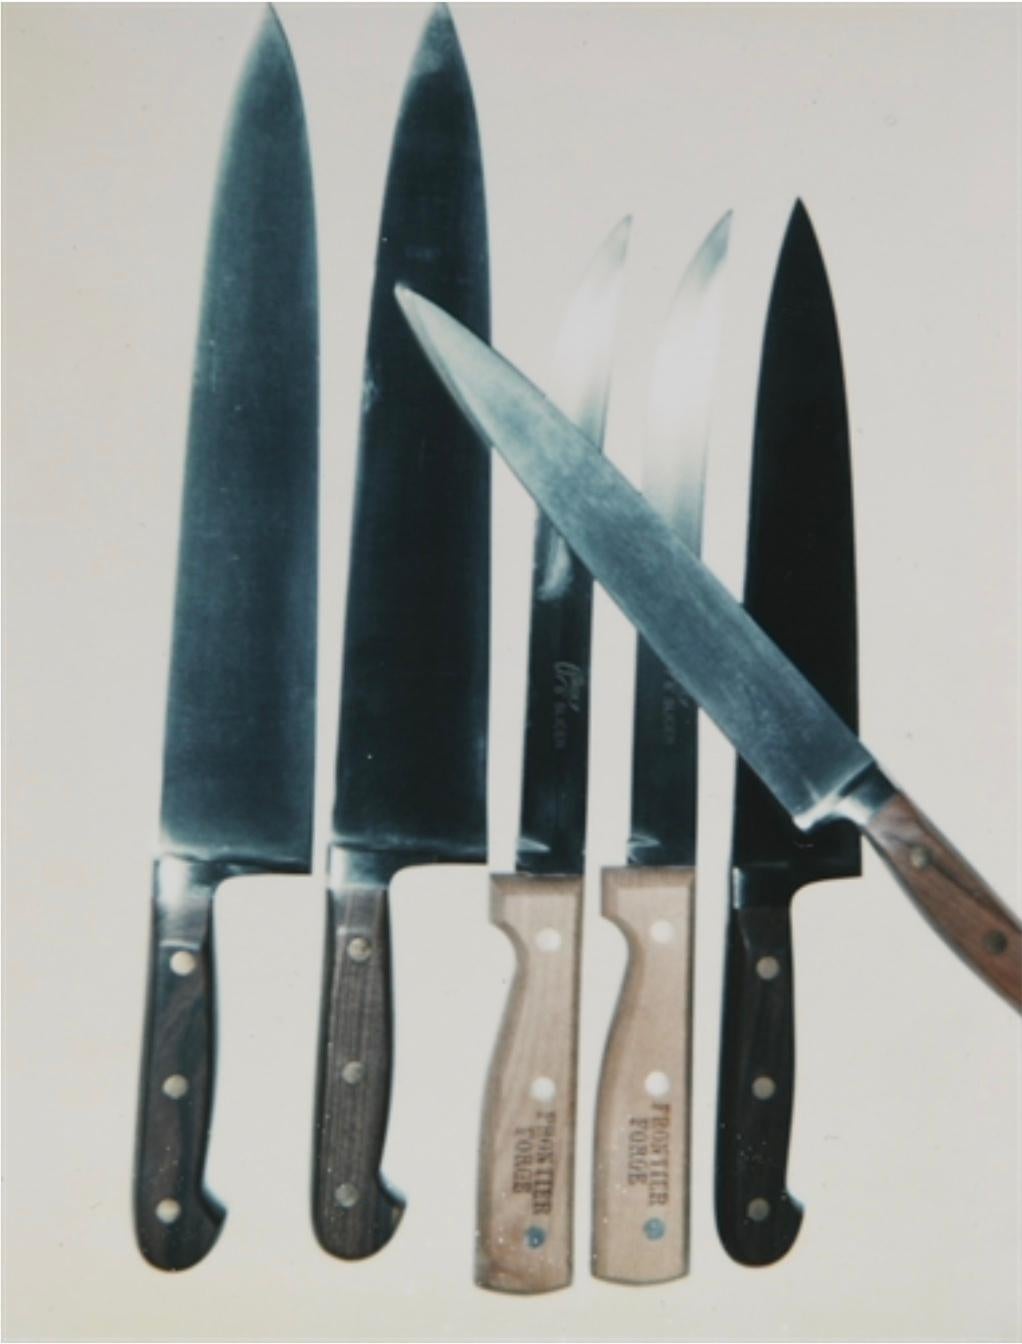 Knives - Pop Art Photograph by Andy Warhol